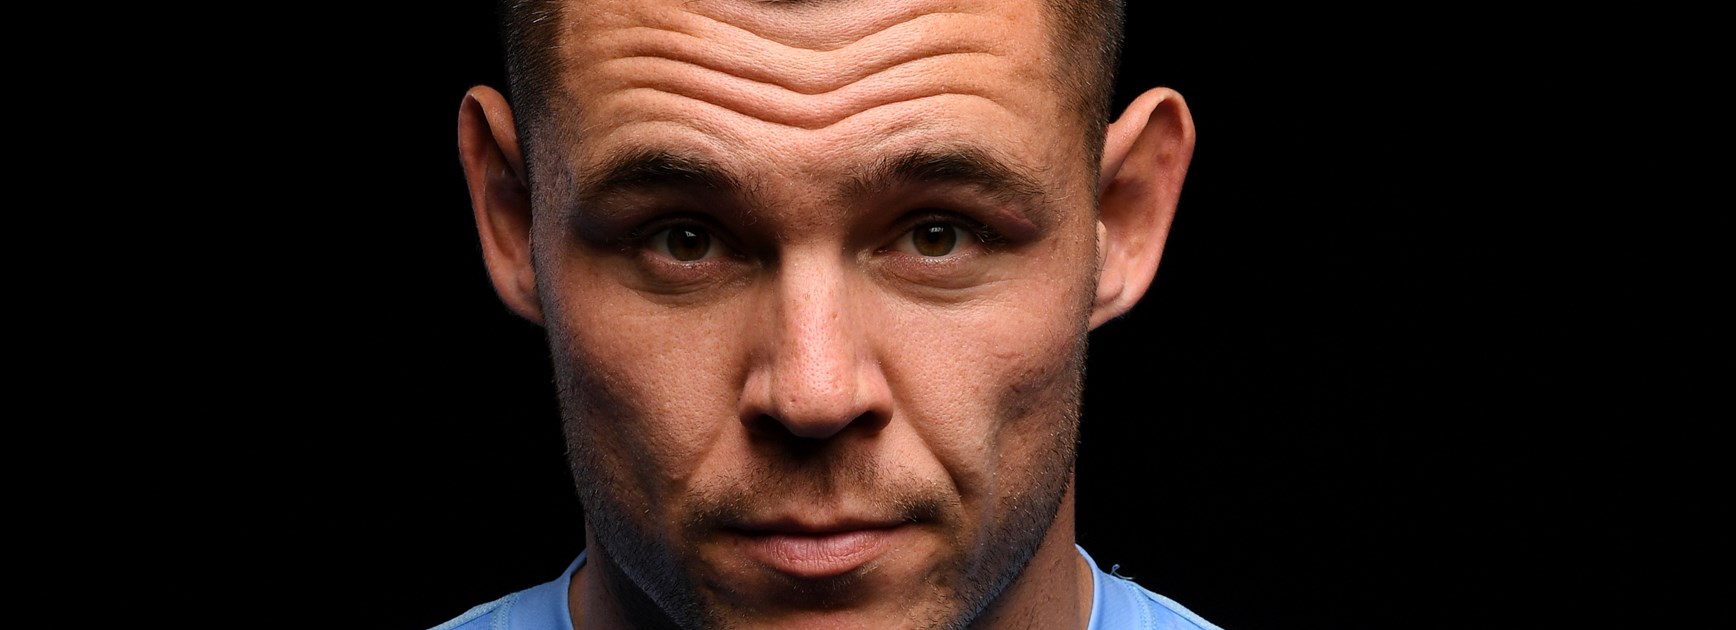 Klemmer: I hate being away from my kids